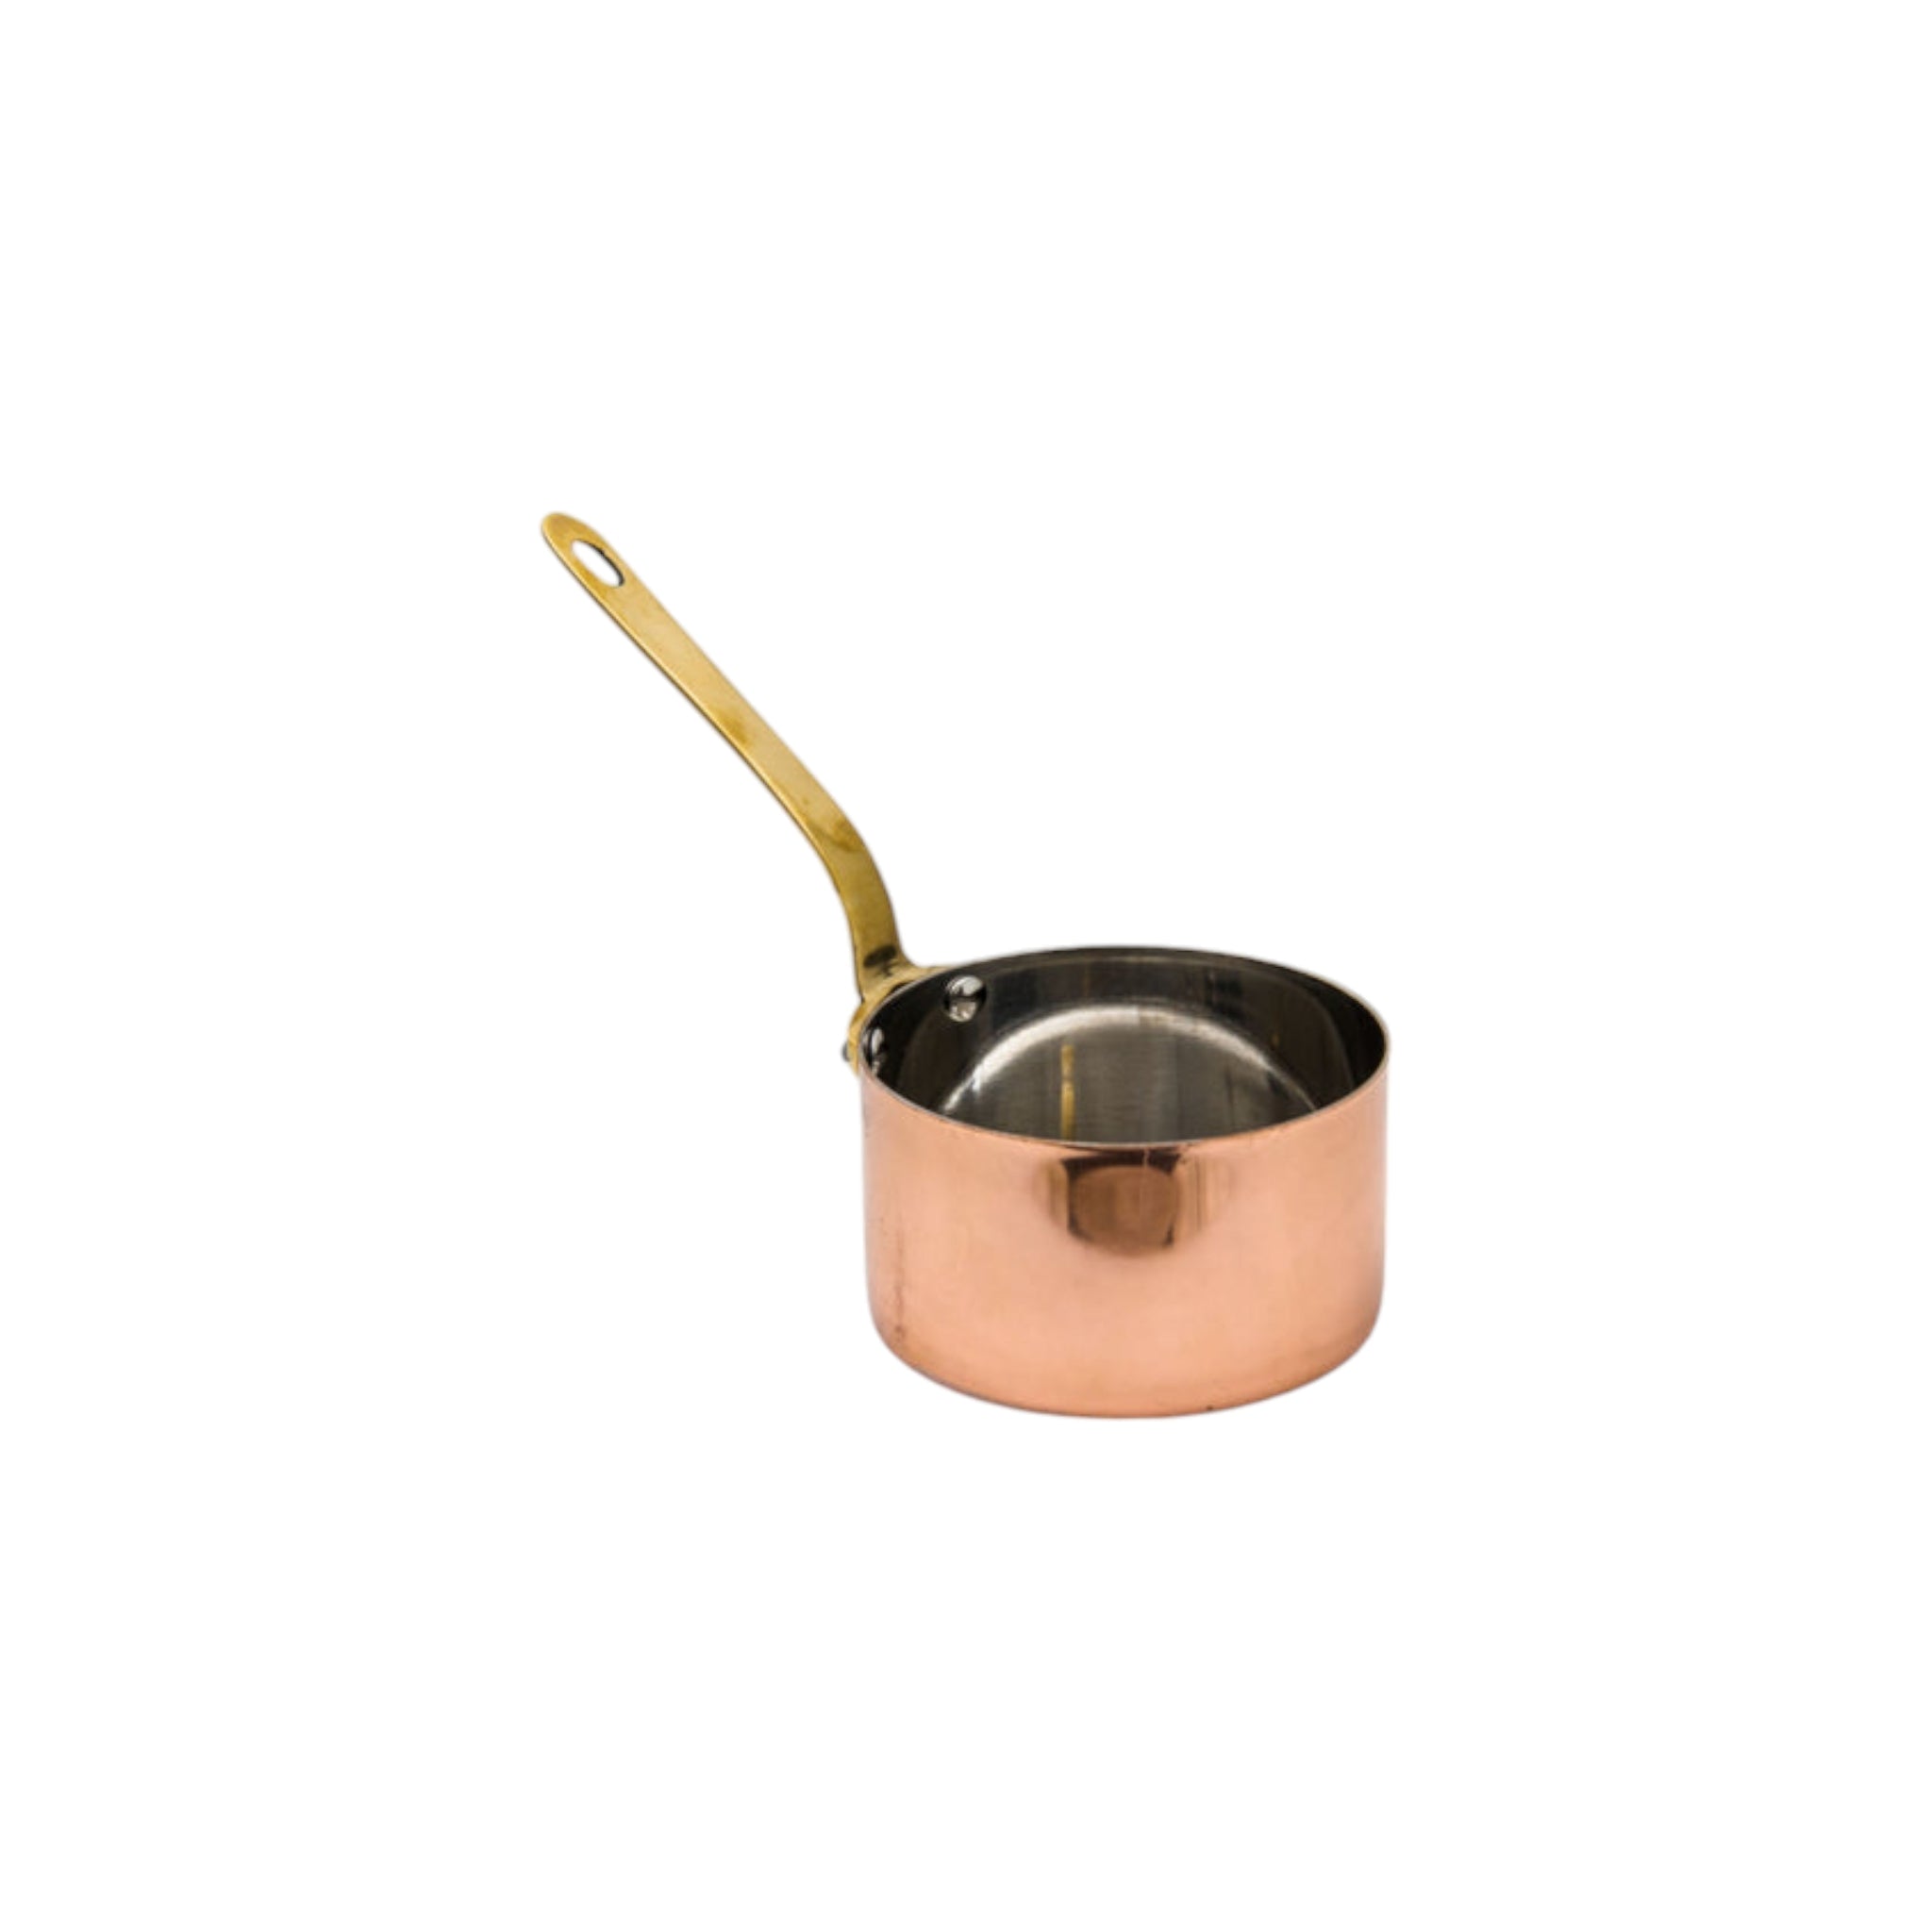 Regent Cookware Serving Mini Pot 350ml with Handle Copper Plated Stainless Steel